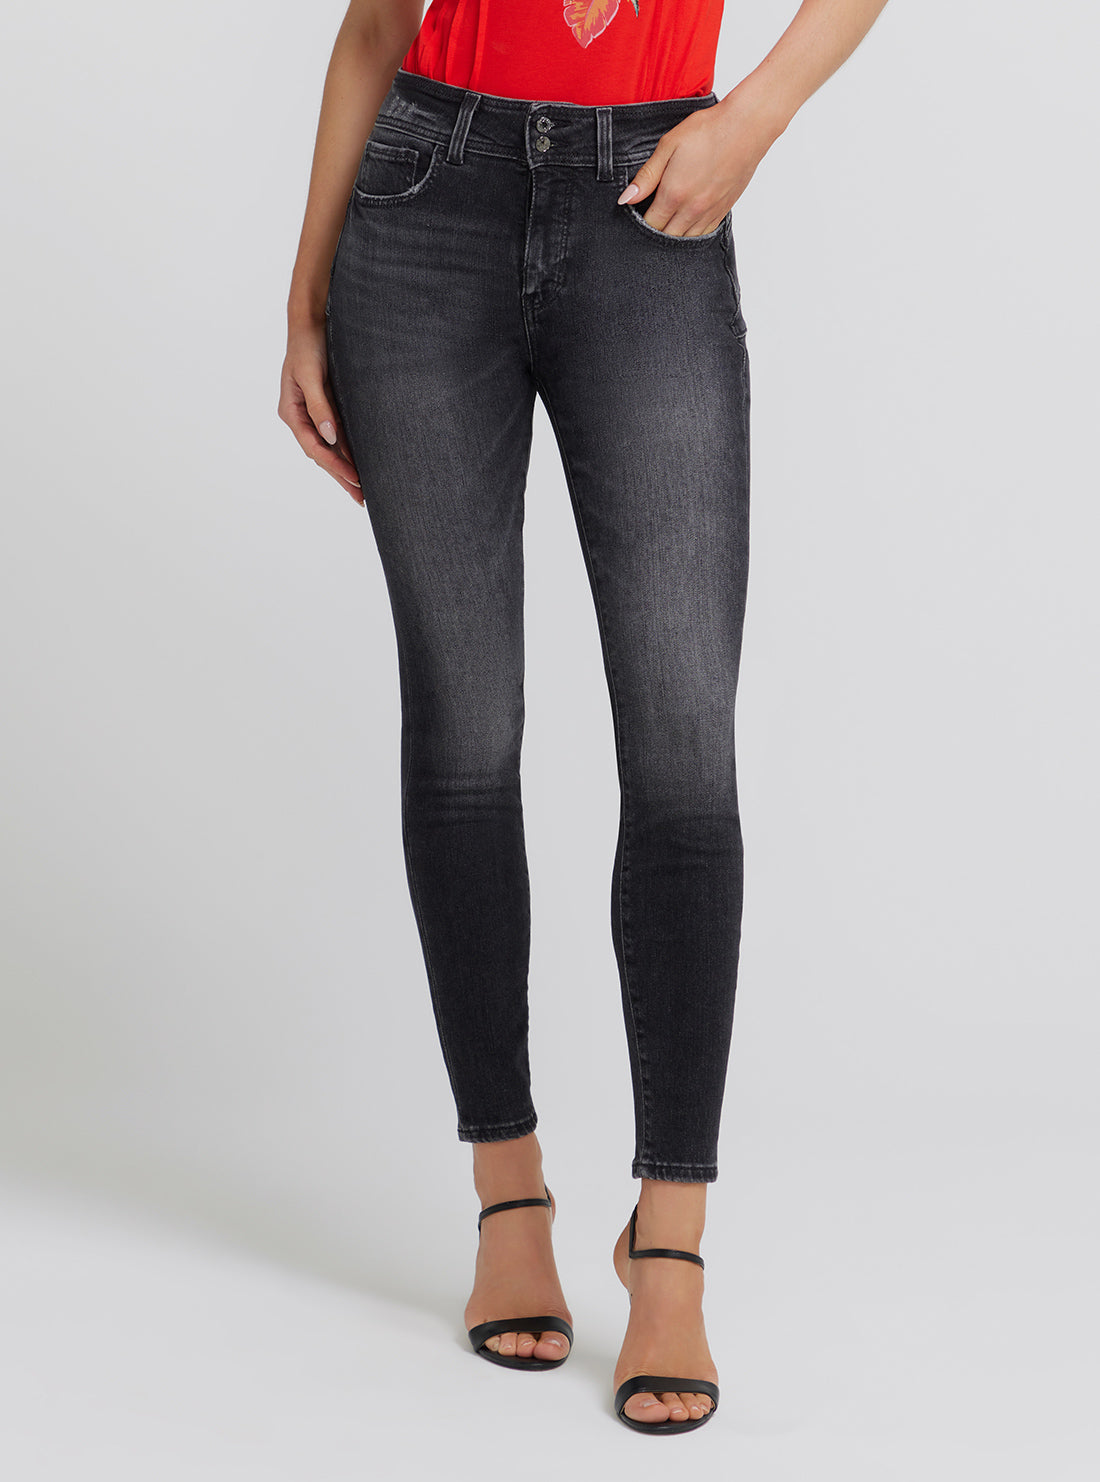 GUESS Women's Eco Mid-Rise Shape Up Denim Jeans In Station Black Wash W3YA35D52T2 Front View